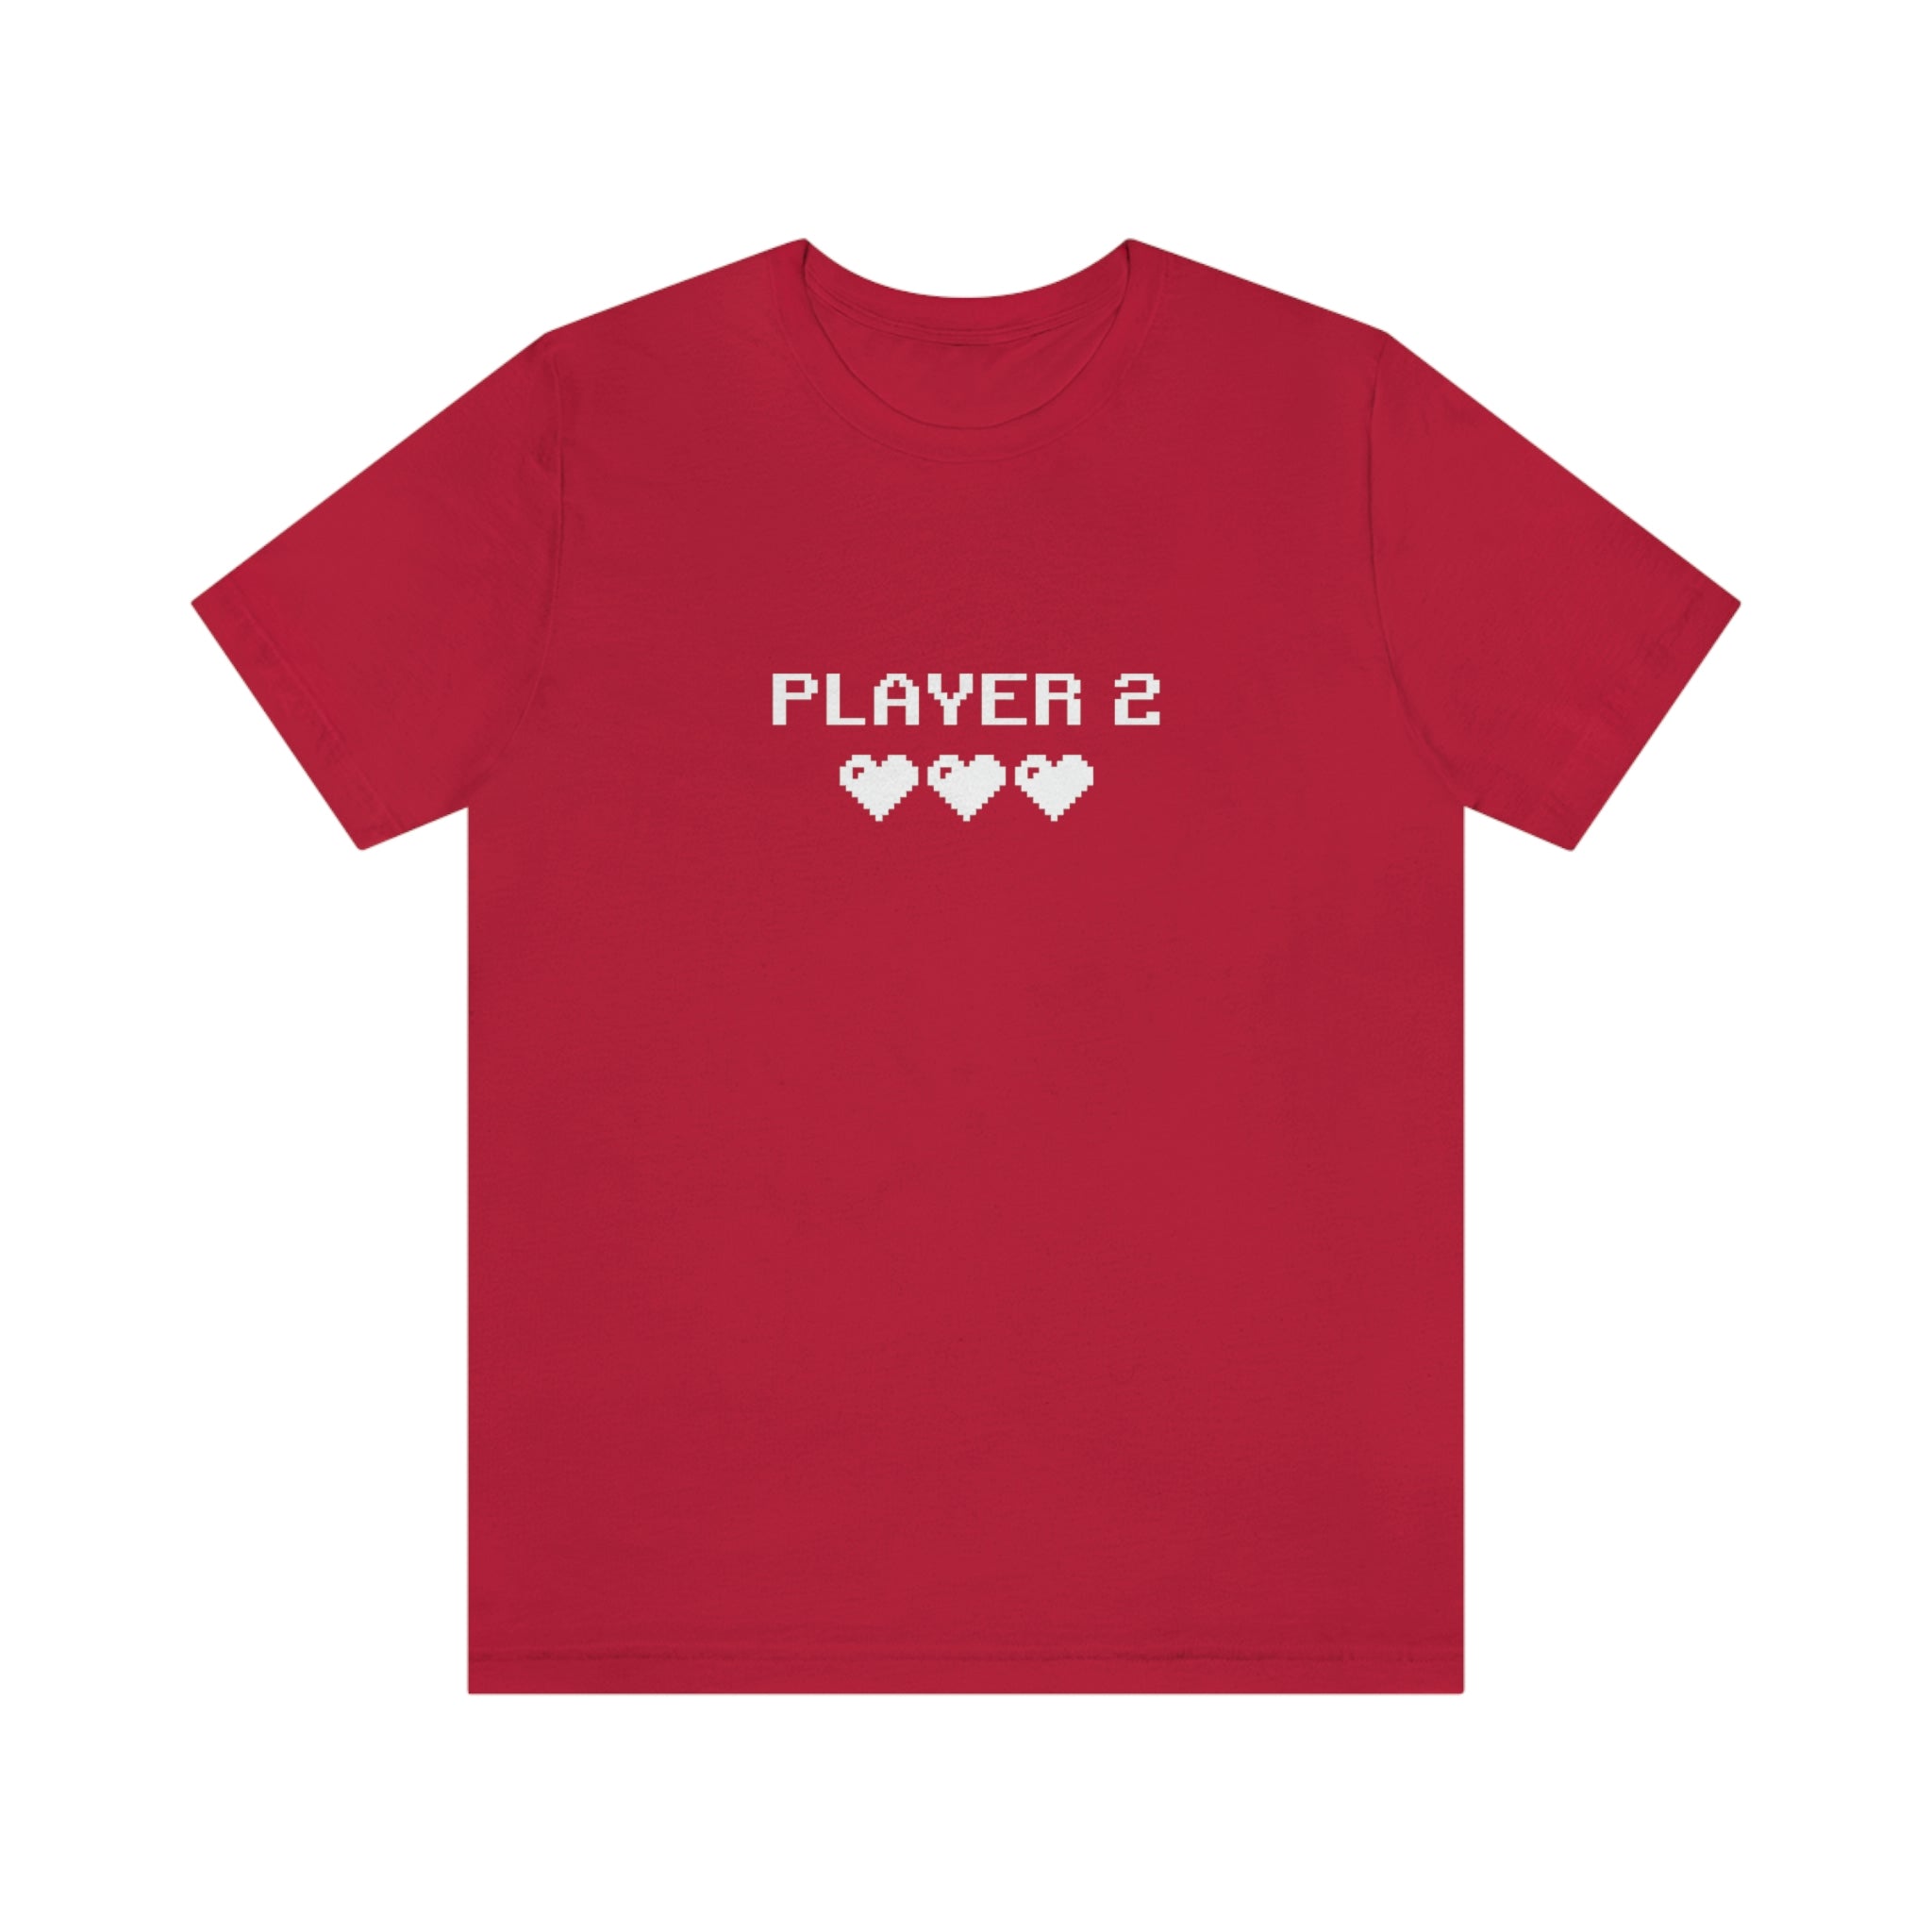 Player 2 Shirt - Gaming T-shirt - Gift for Gamers